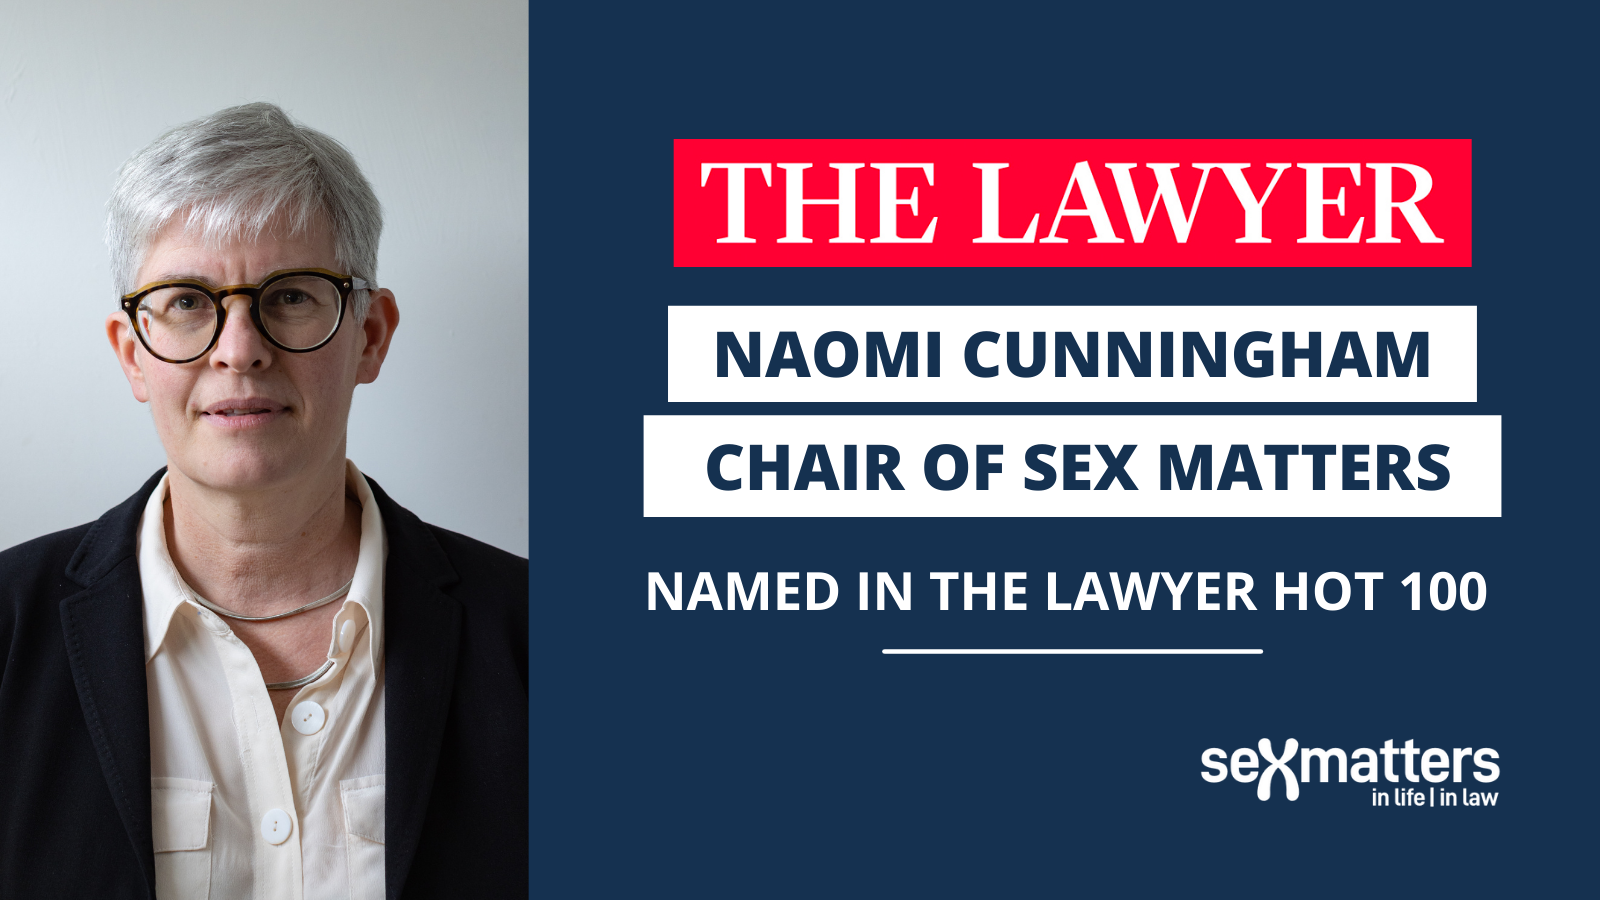 Naomi Cunningham named in The Lawyers 2022 Hot image pic image